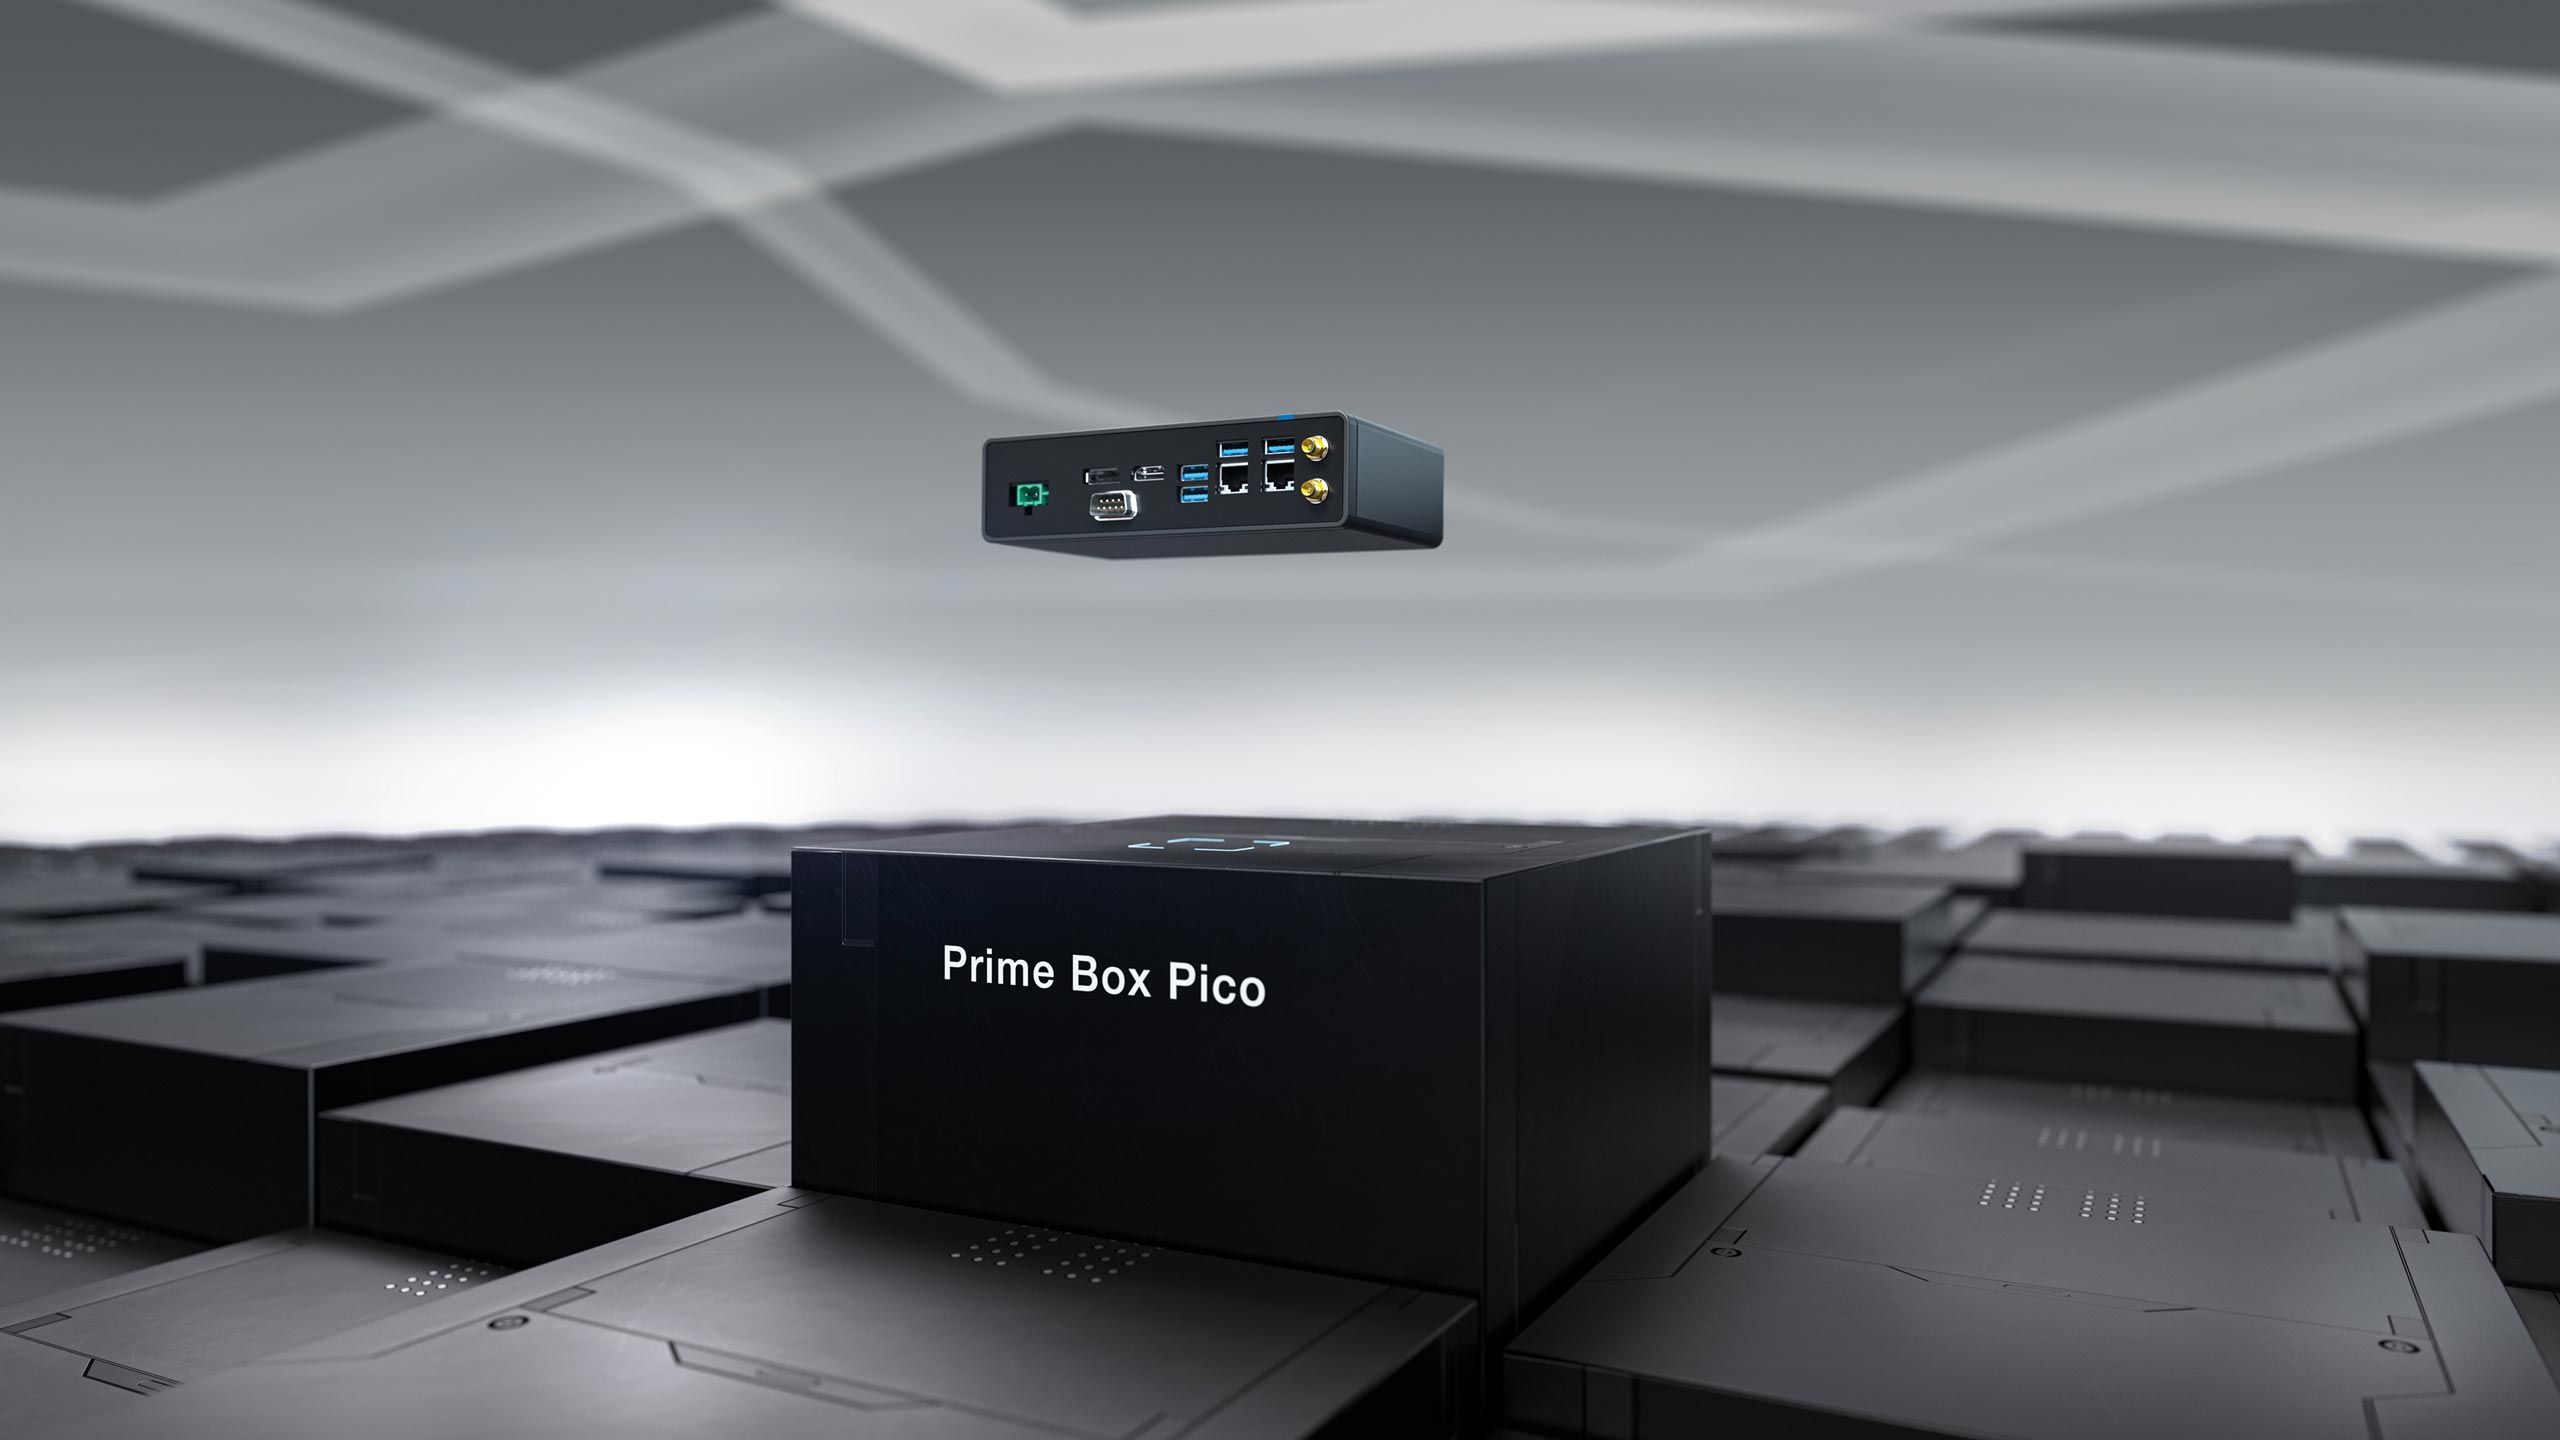 Prime Box Pico on a dark base. You can see the connections